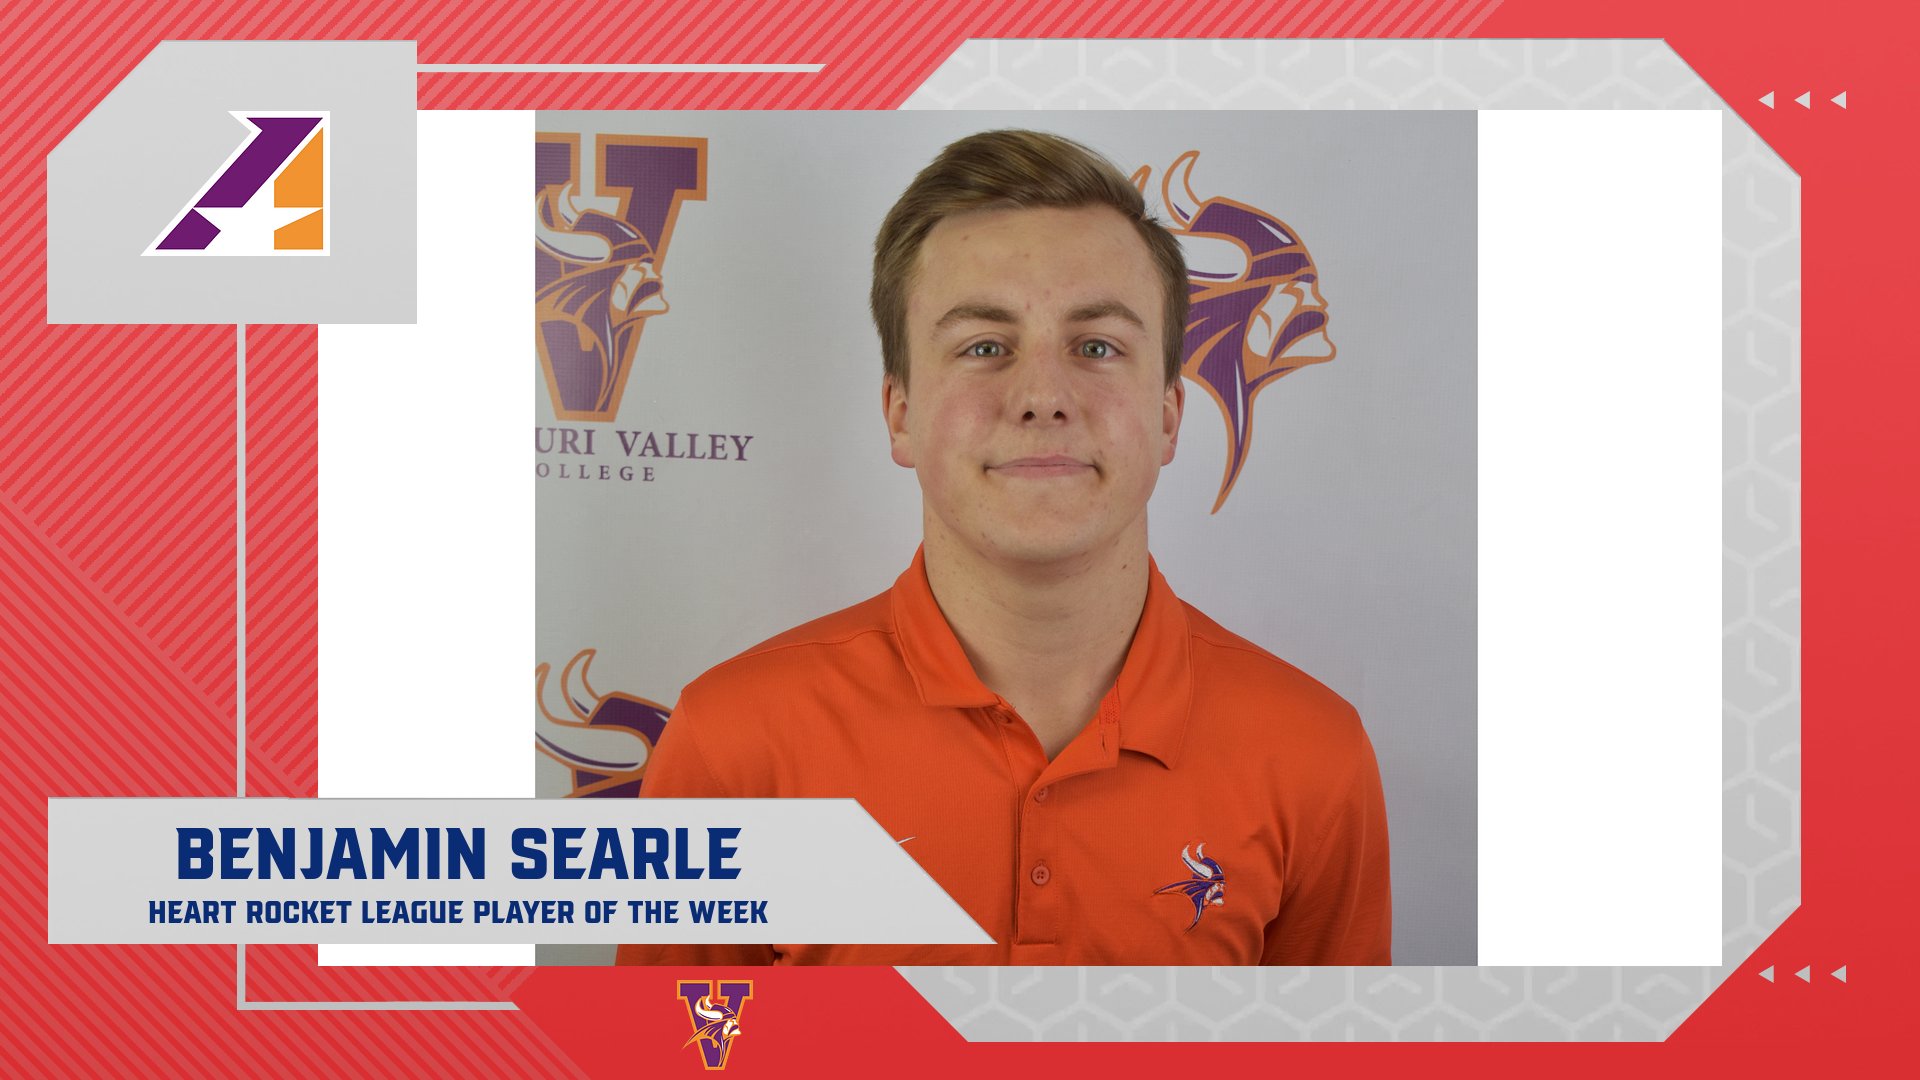 Missouri Valley’s Benjamin Searle Selected Heart Esports Rocket League Player of the Week